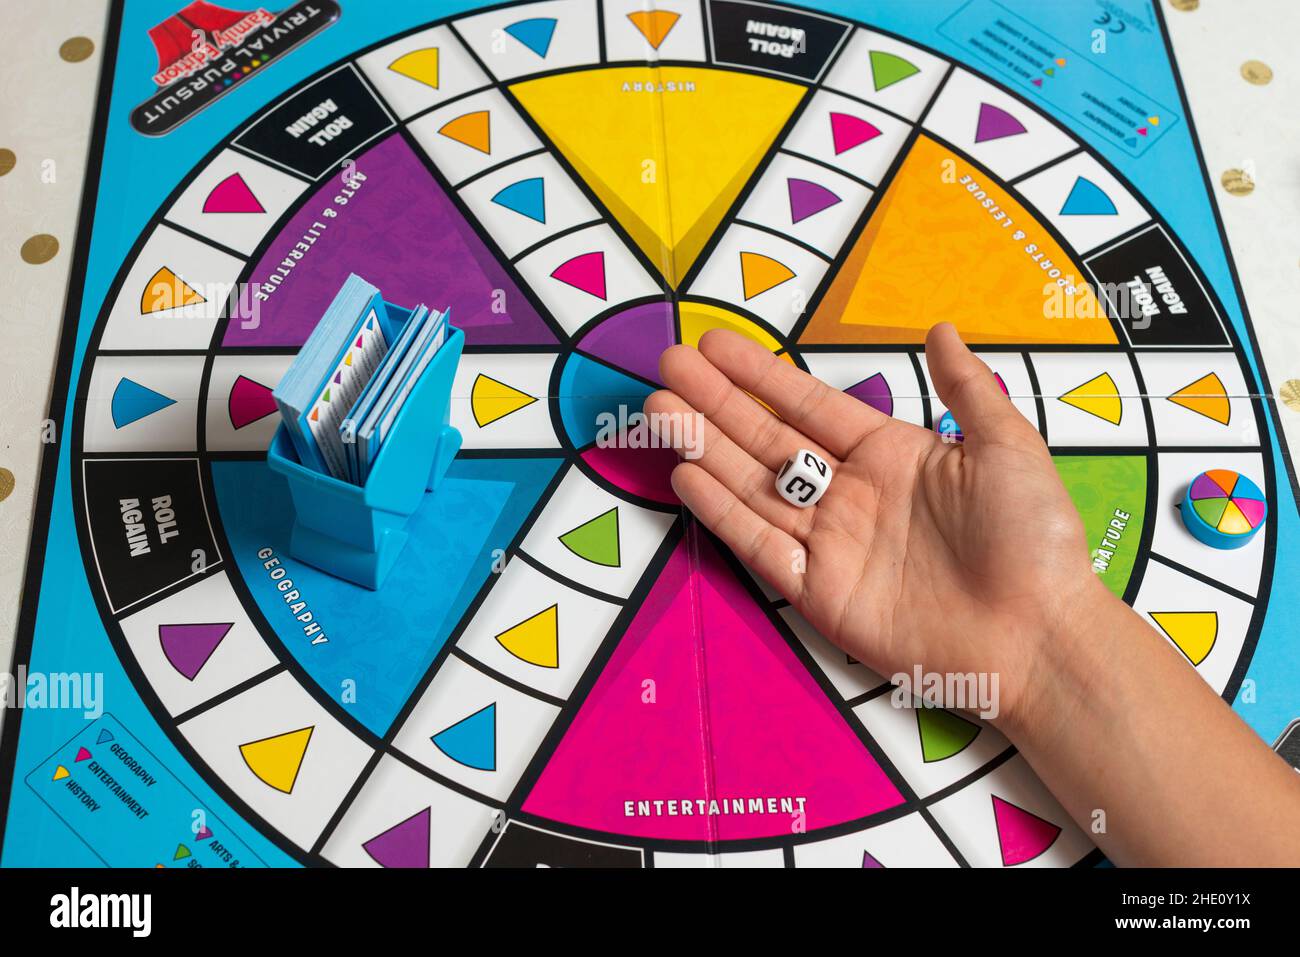 Playing Trivial  pursuit board game at home during Covid-19 lockdown,- dice in palm London,UK Stock Photo